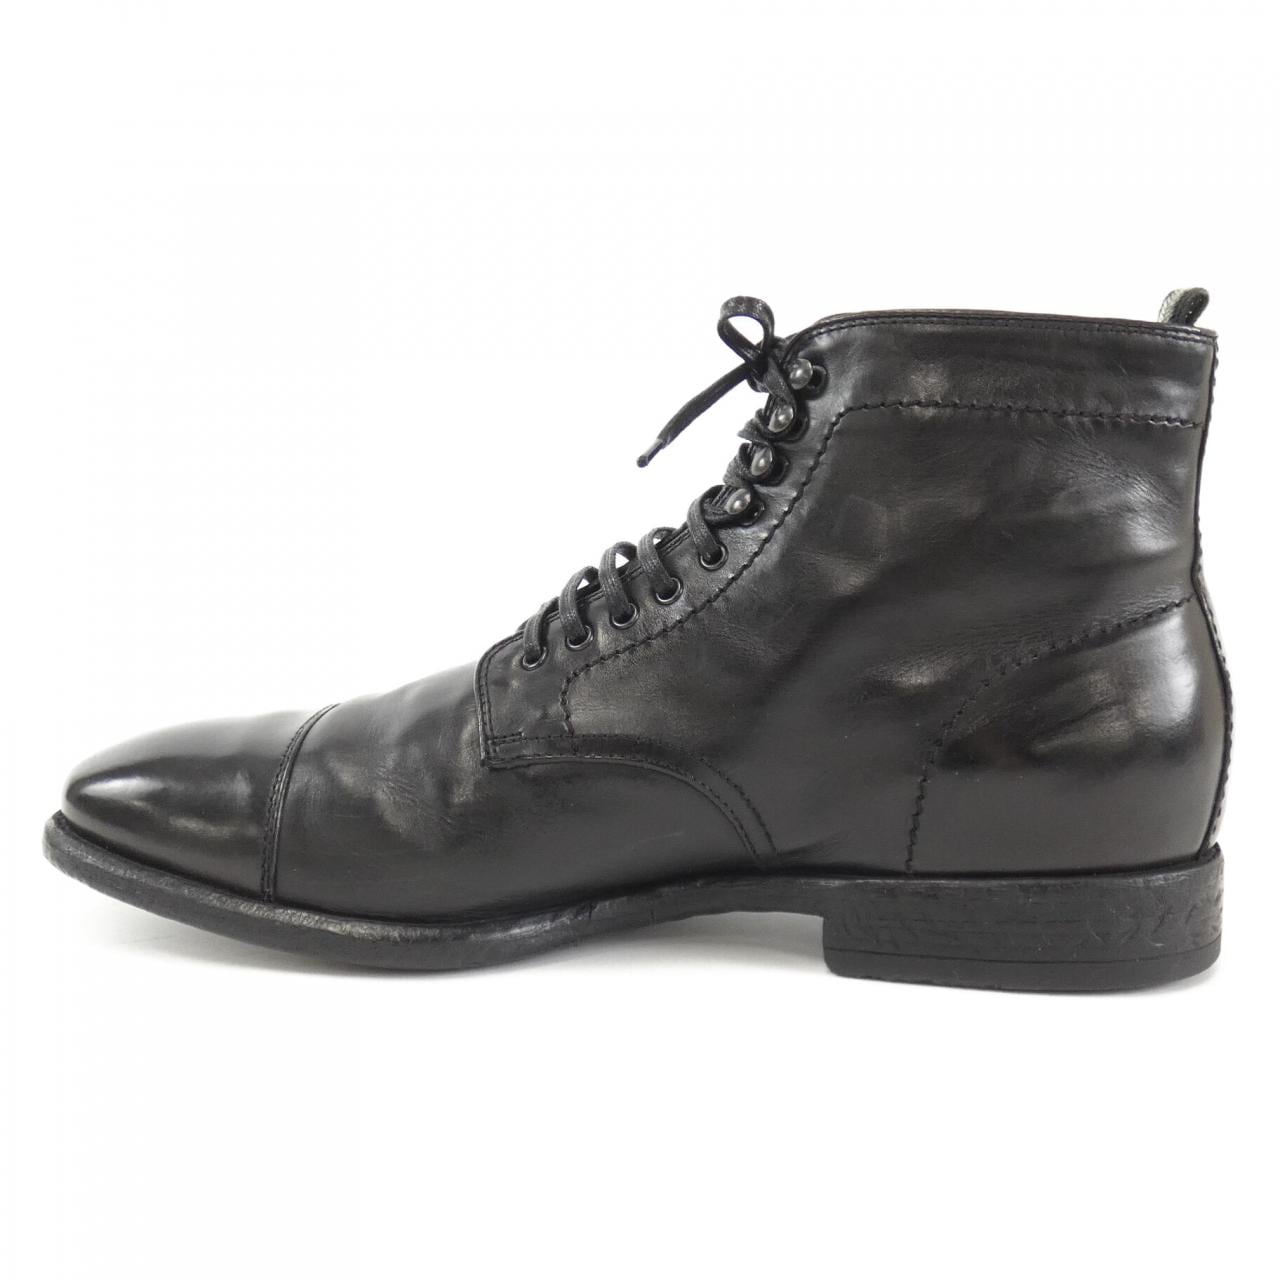 OFFICINE CREATIVE boots